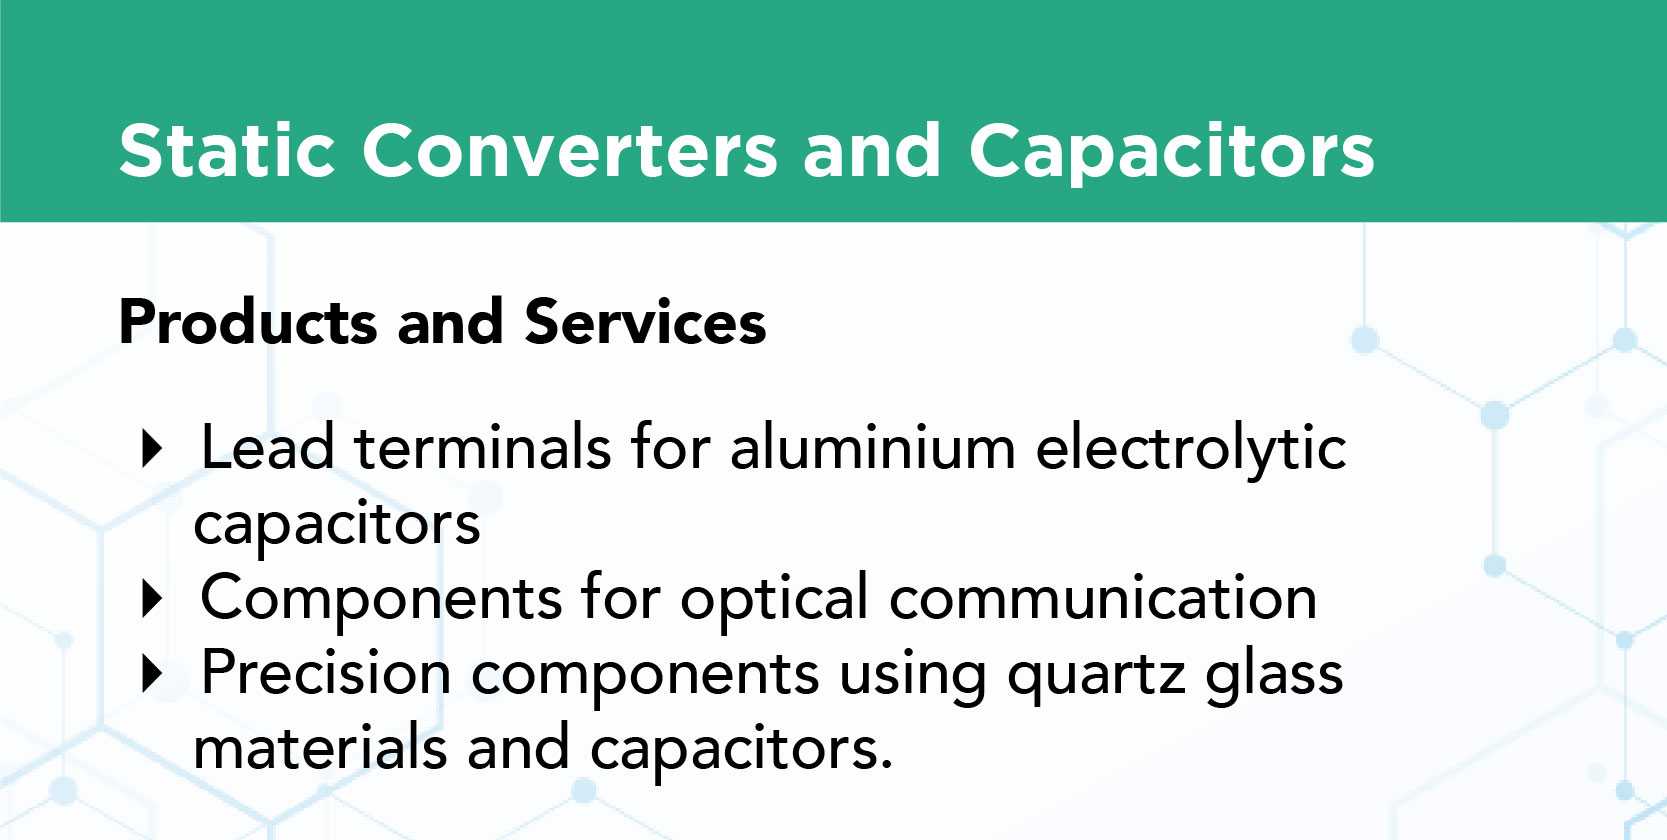 Static Converters and Capacitors